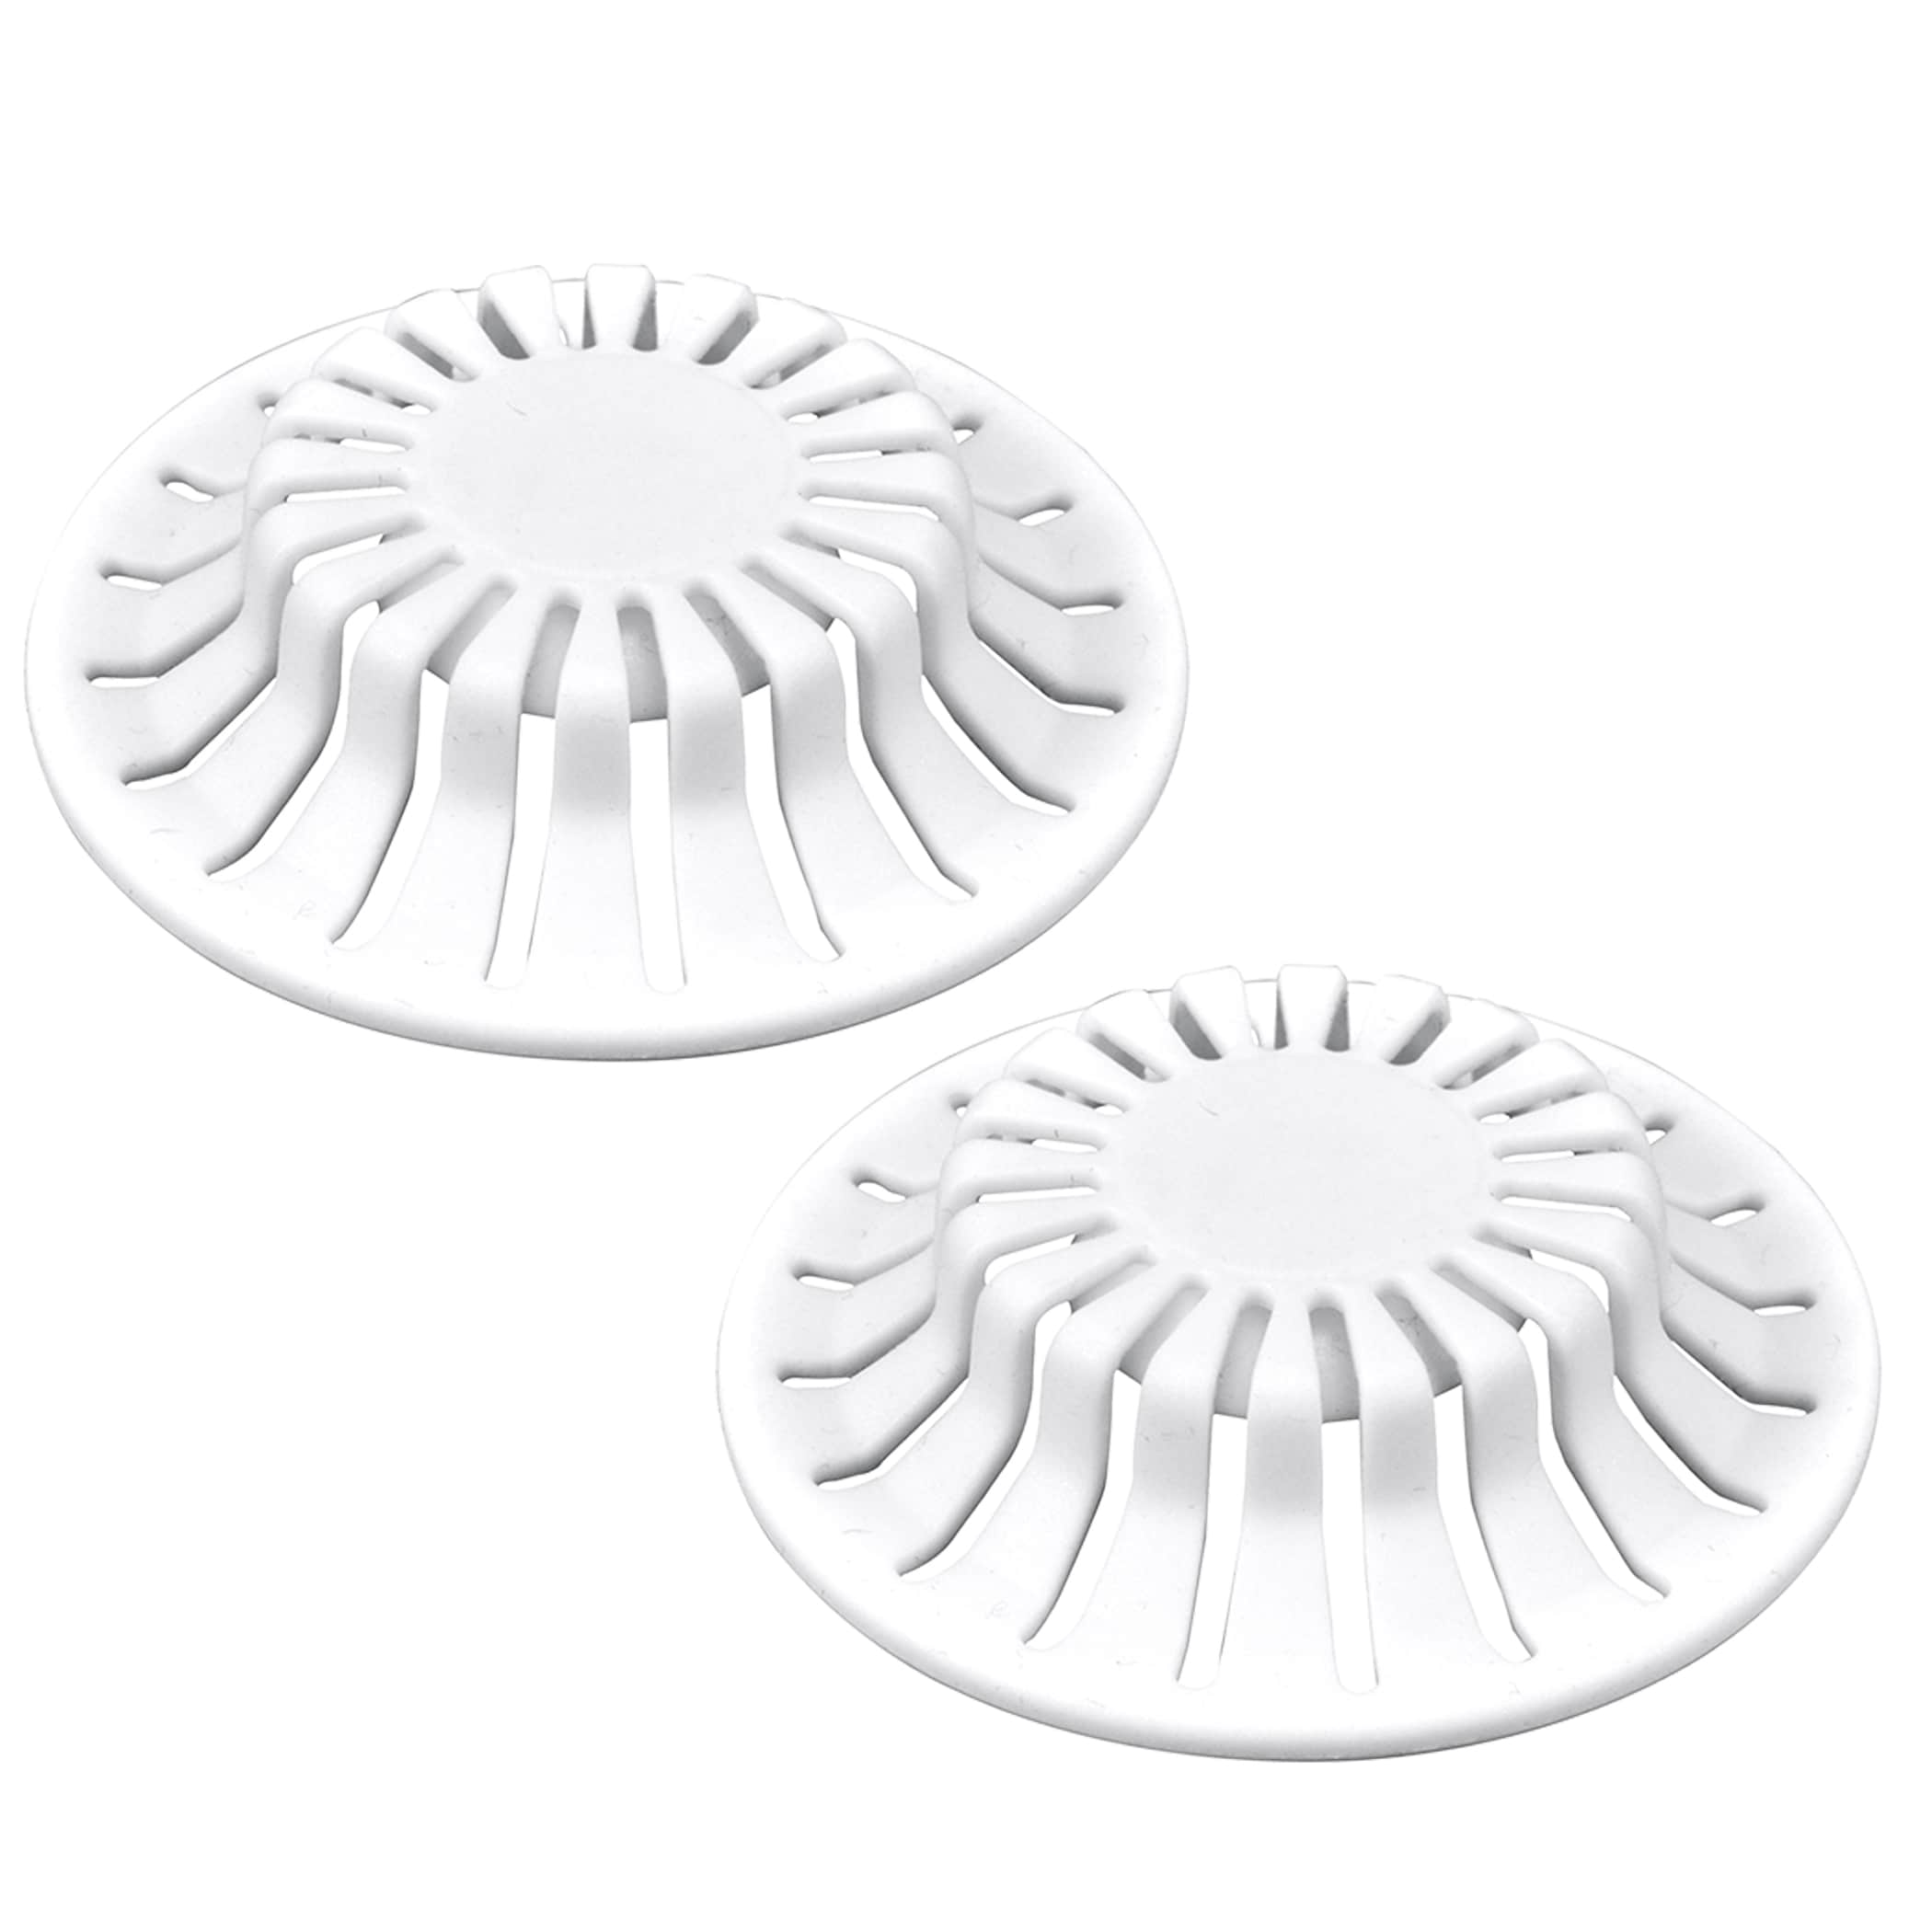 Bathtub Drain Protector Hair Catcher Silicone Collapsible for Pop